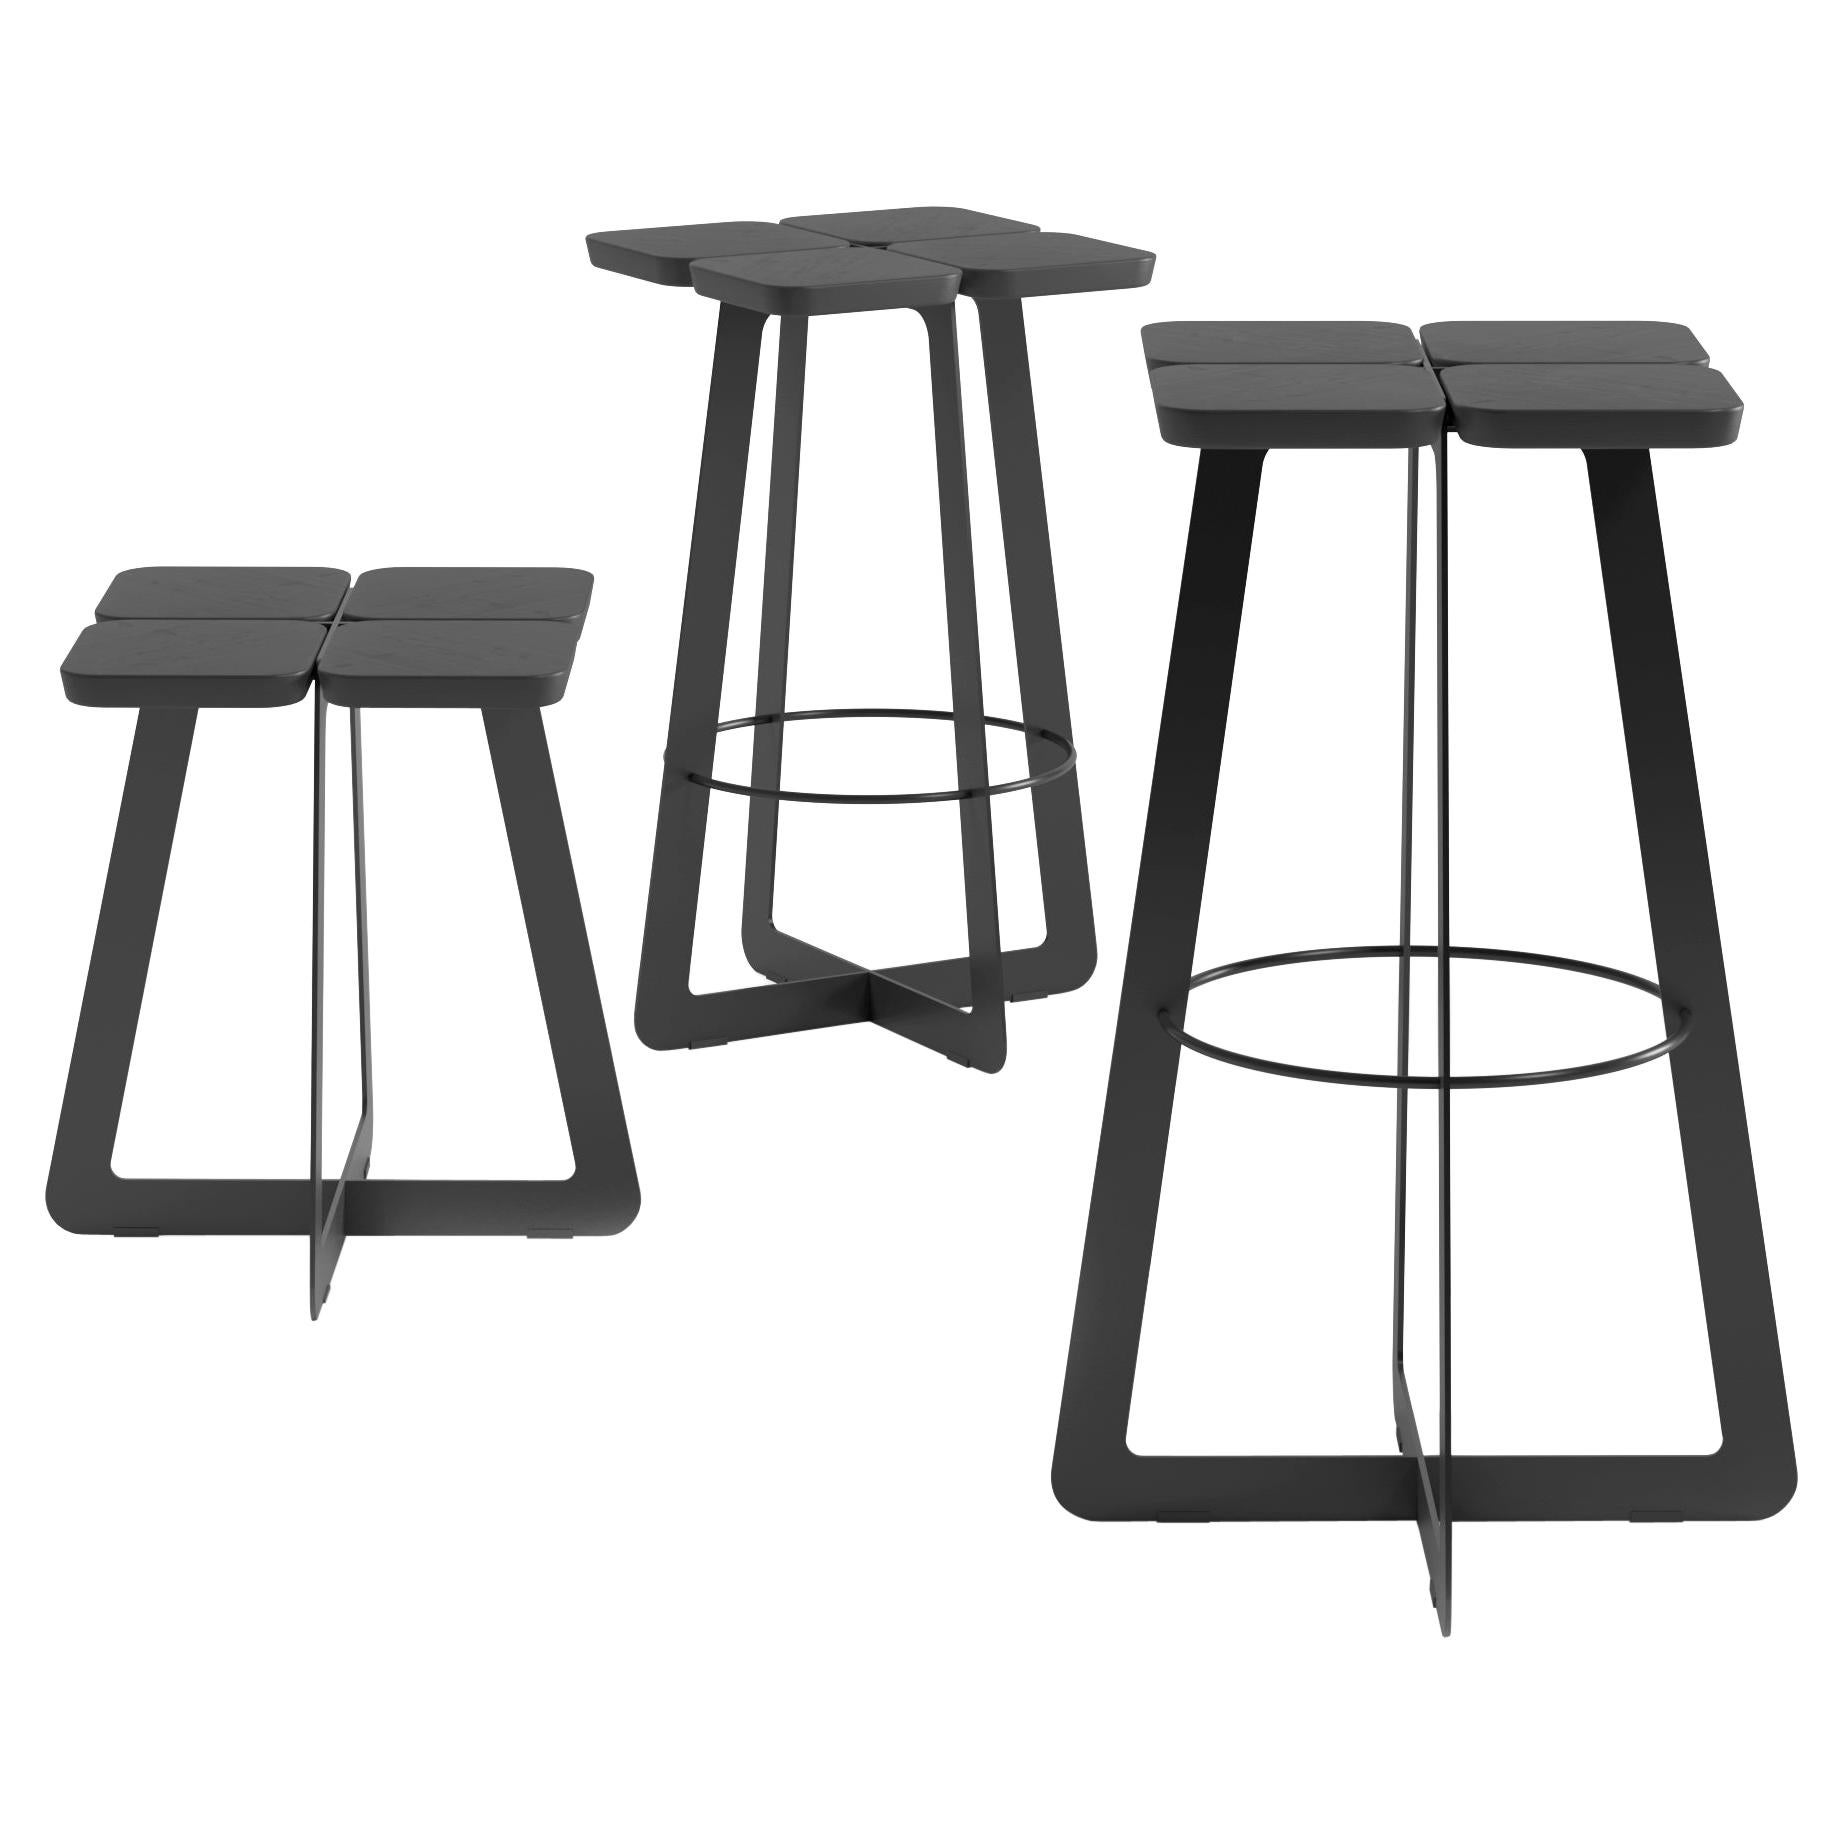 Laconic Black Stool, Collection Stern in Minimalism Style for Modern Residence